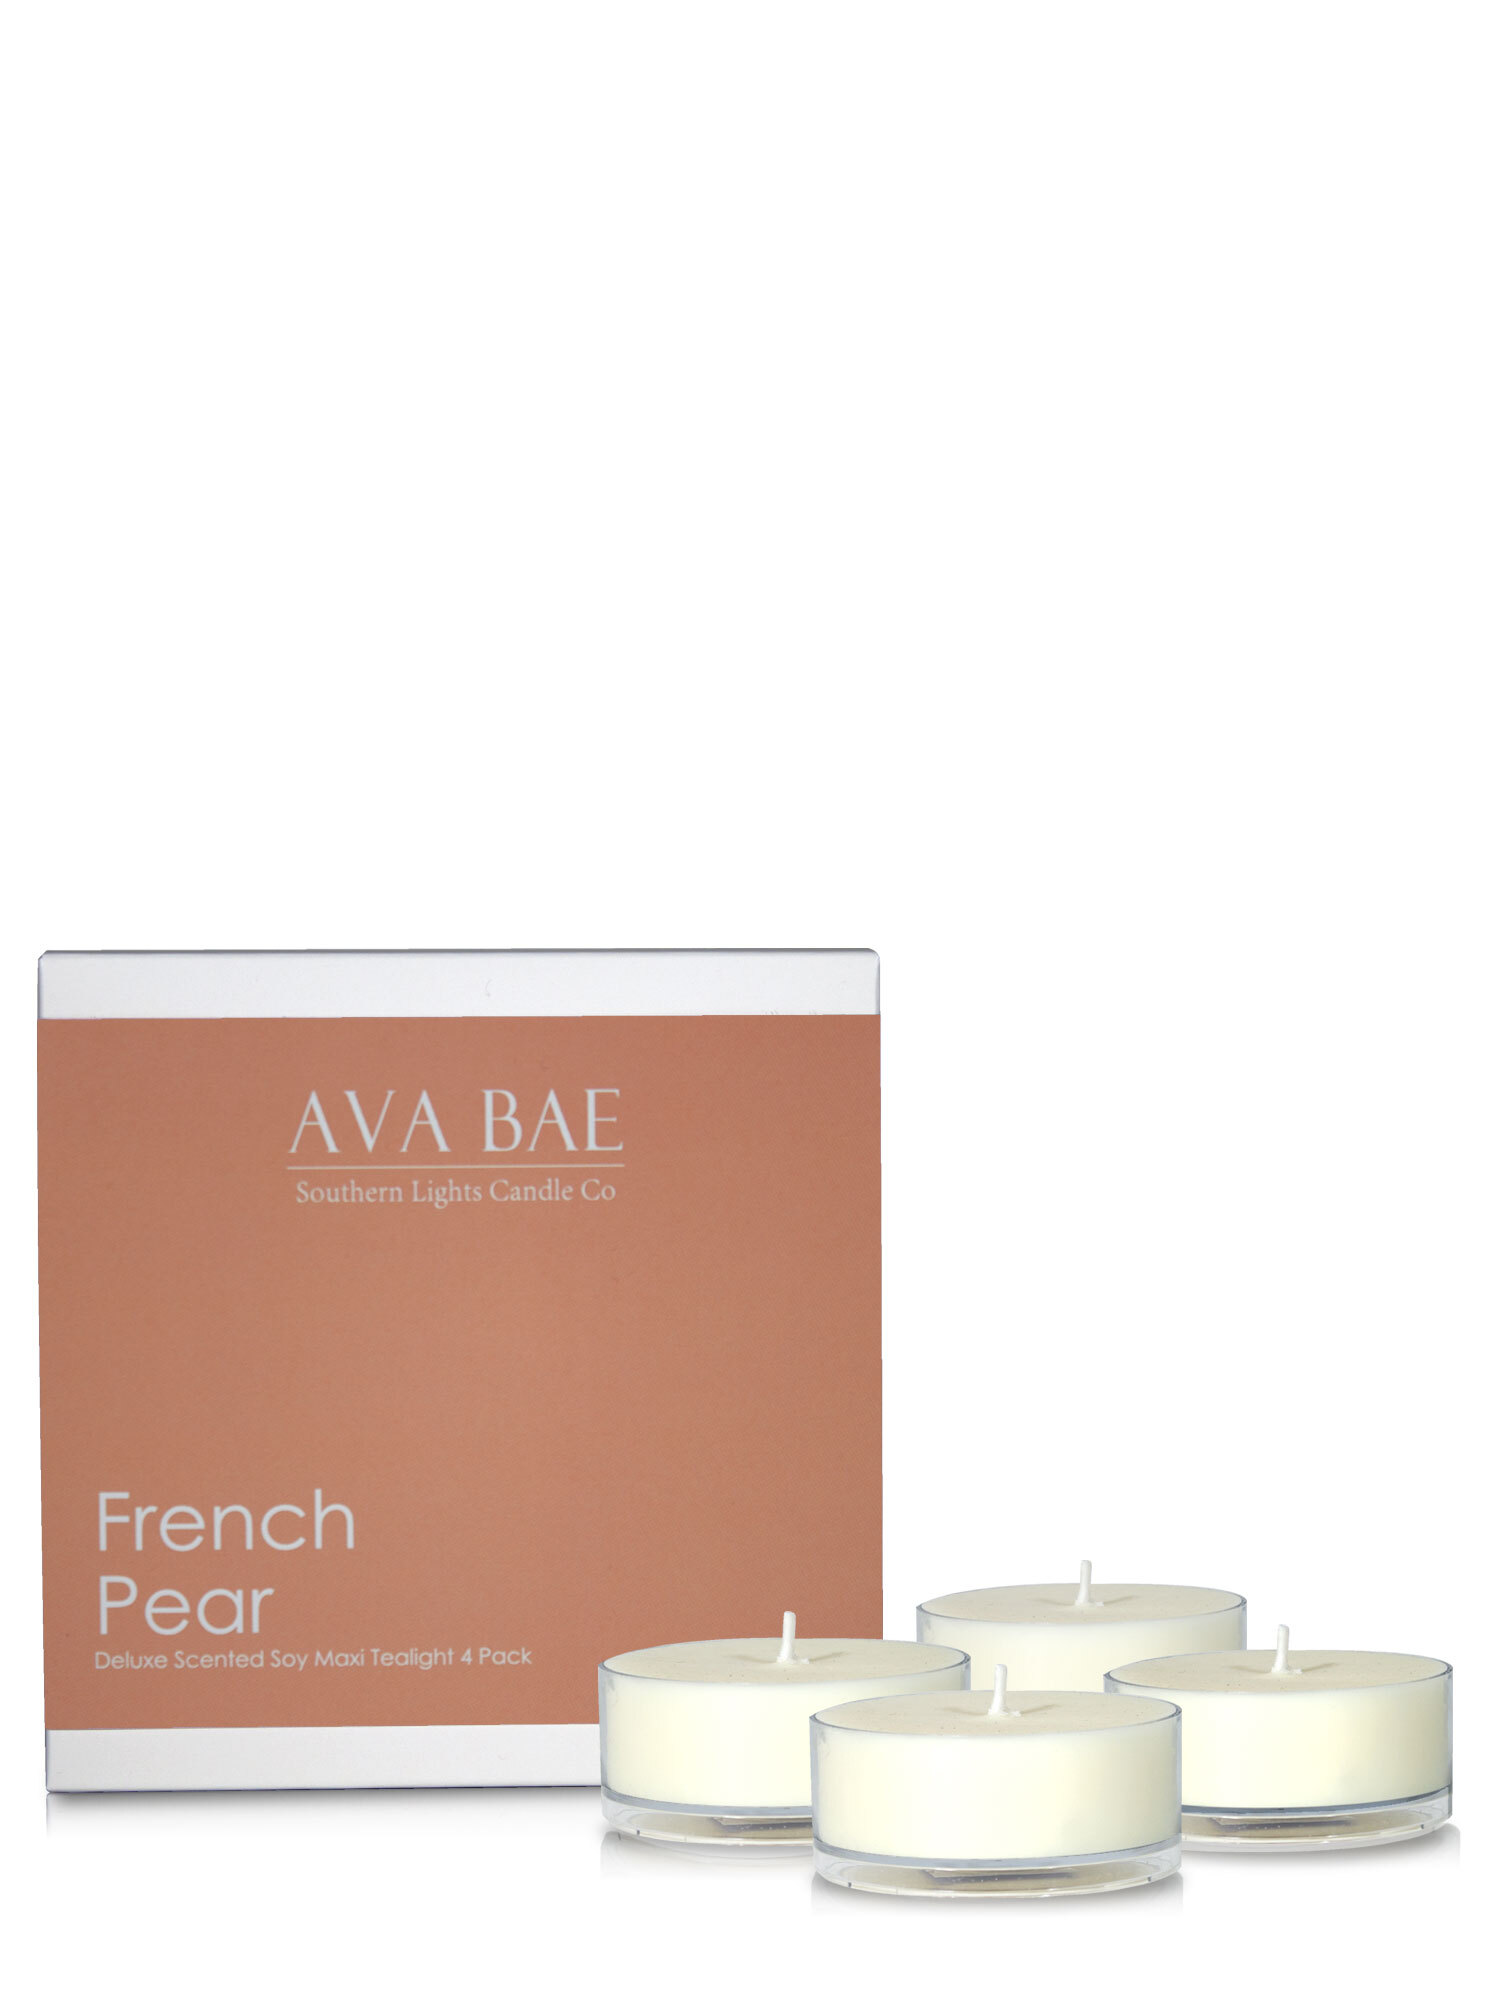 Ava Bae Soy Maxi Tealight Pack - French Pear